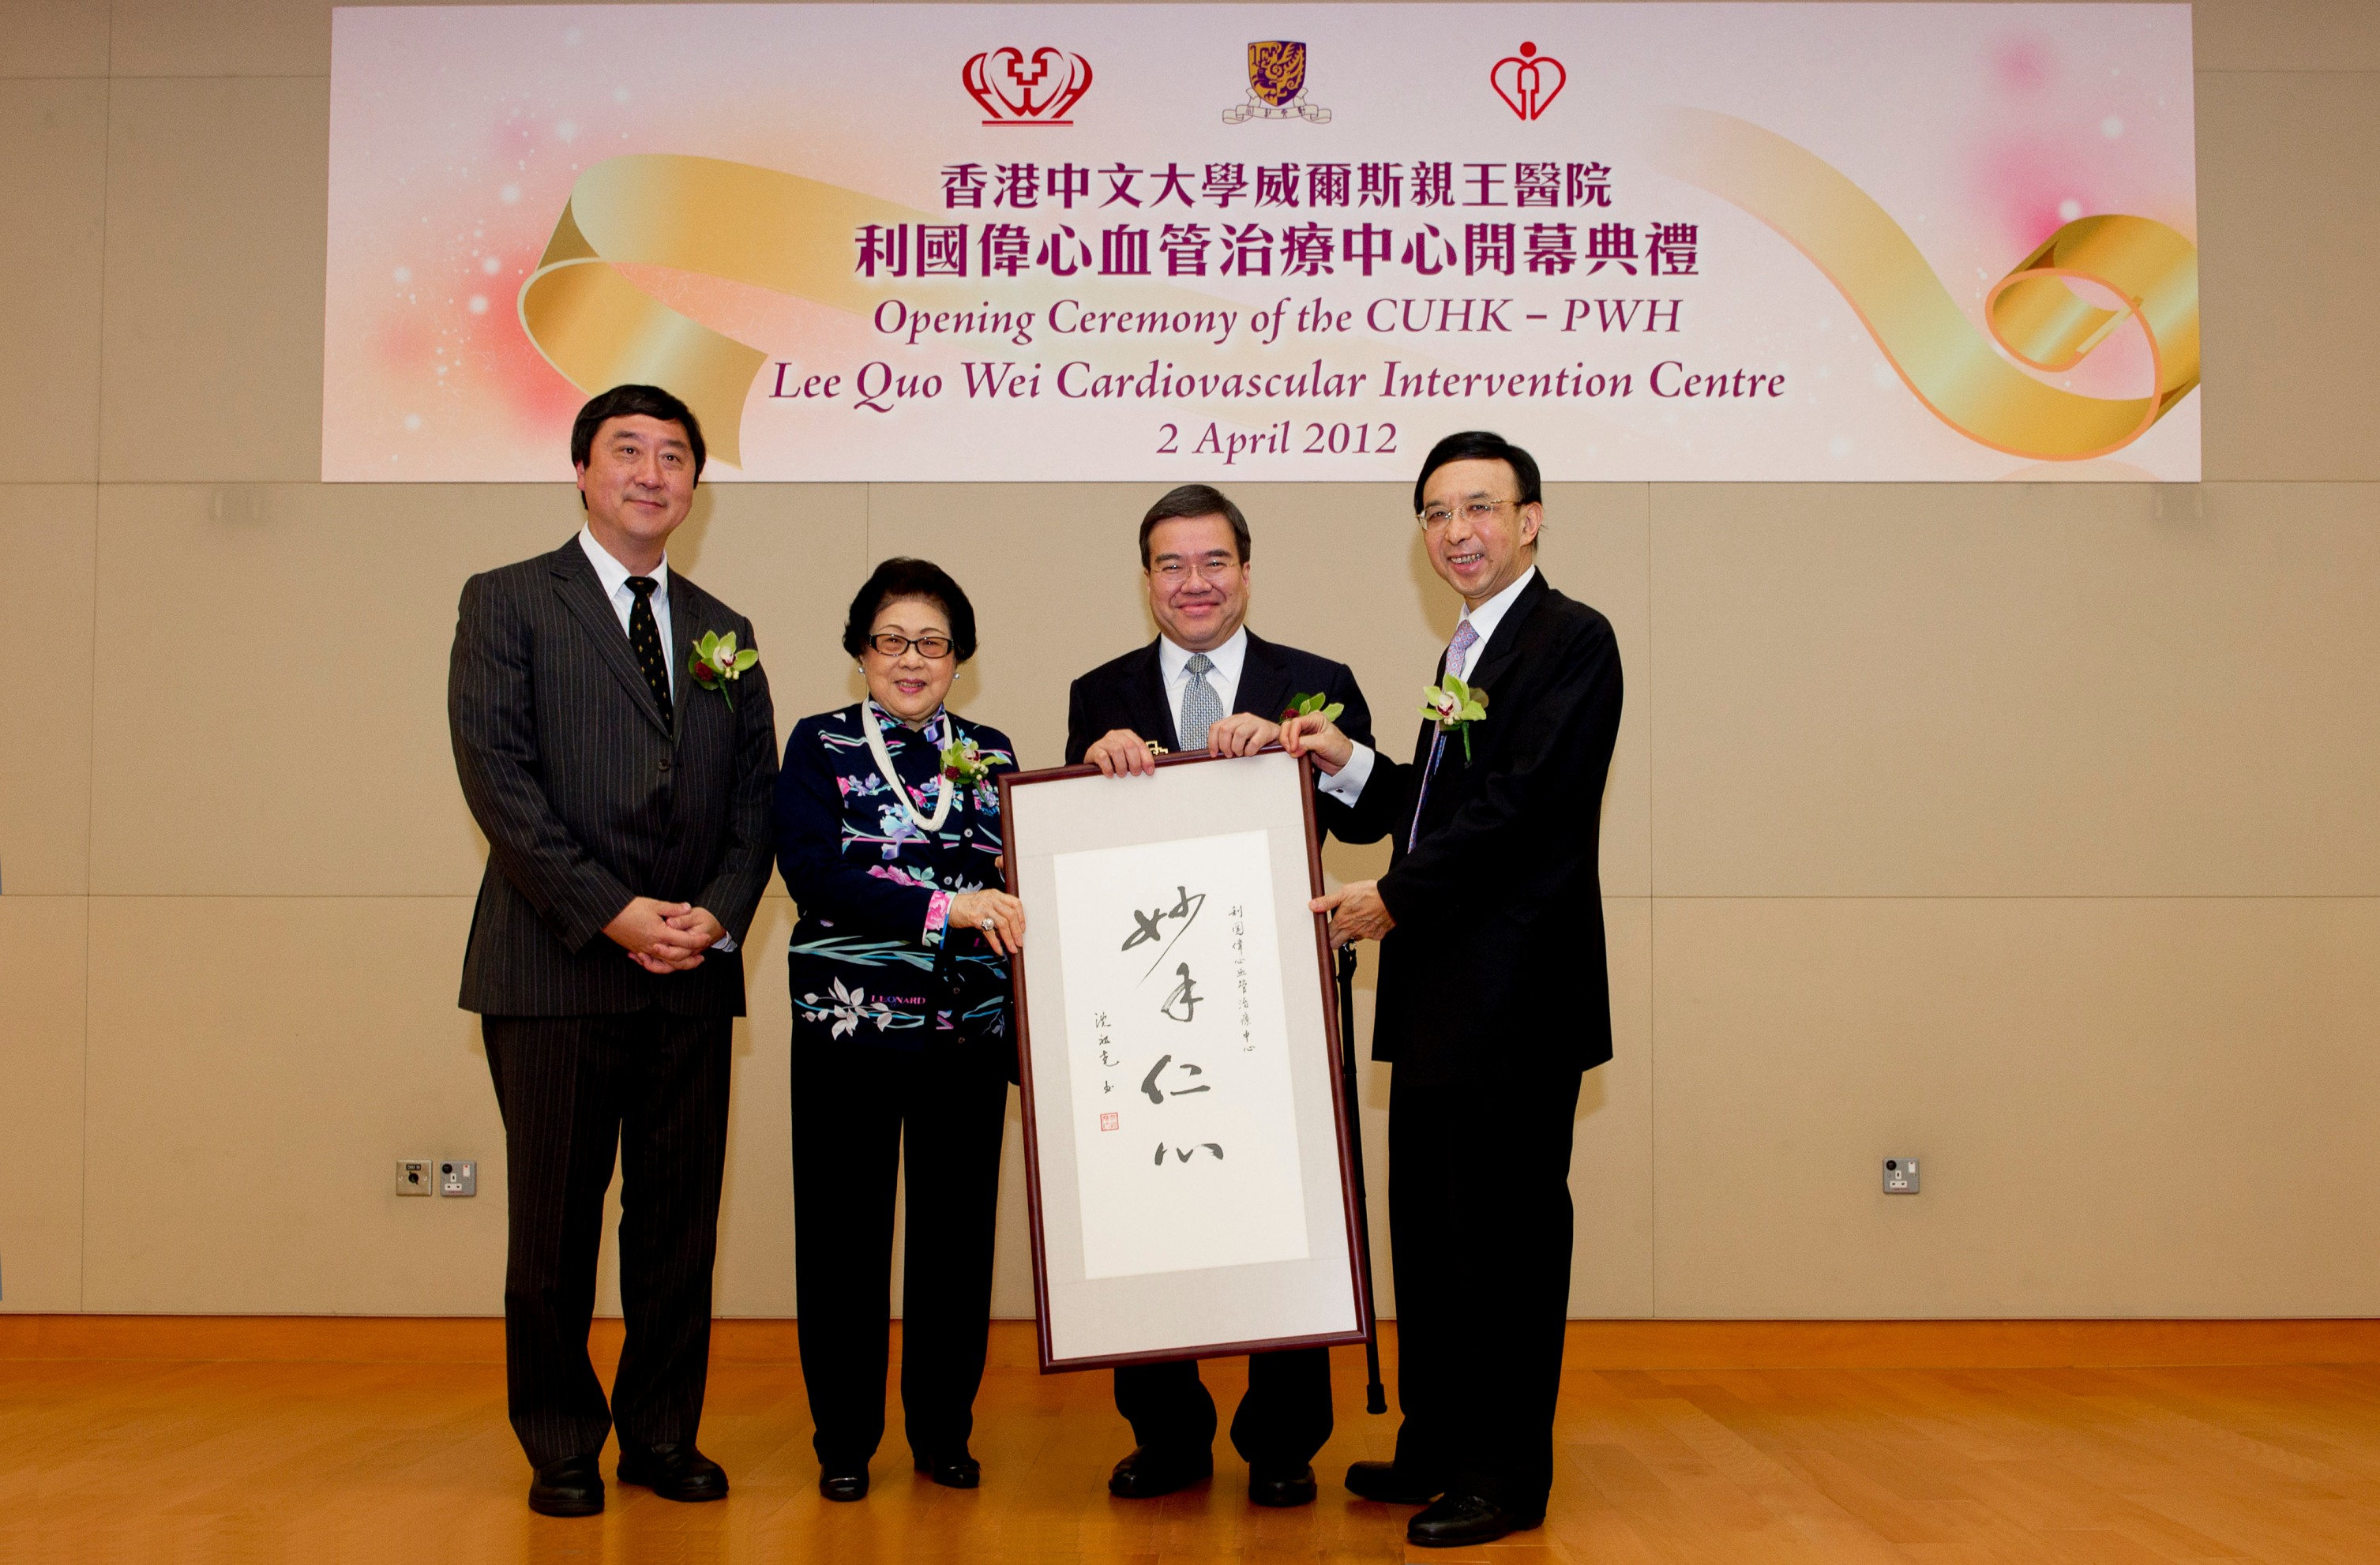 Mr. Anthony Wu, Chairman of the Hospital Authority (2nd right); Dr. Vincent Cheng, Chairman of the Council, CUHK (1st right) and Prof. Joseph Sung, Vice-Chancellor and President, CUHK (1st left) jointly present a calligraphy written by Professor Sung as a souvenir to Mrs. Lee (2nd left)